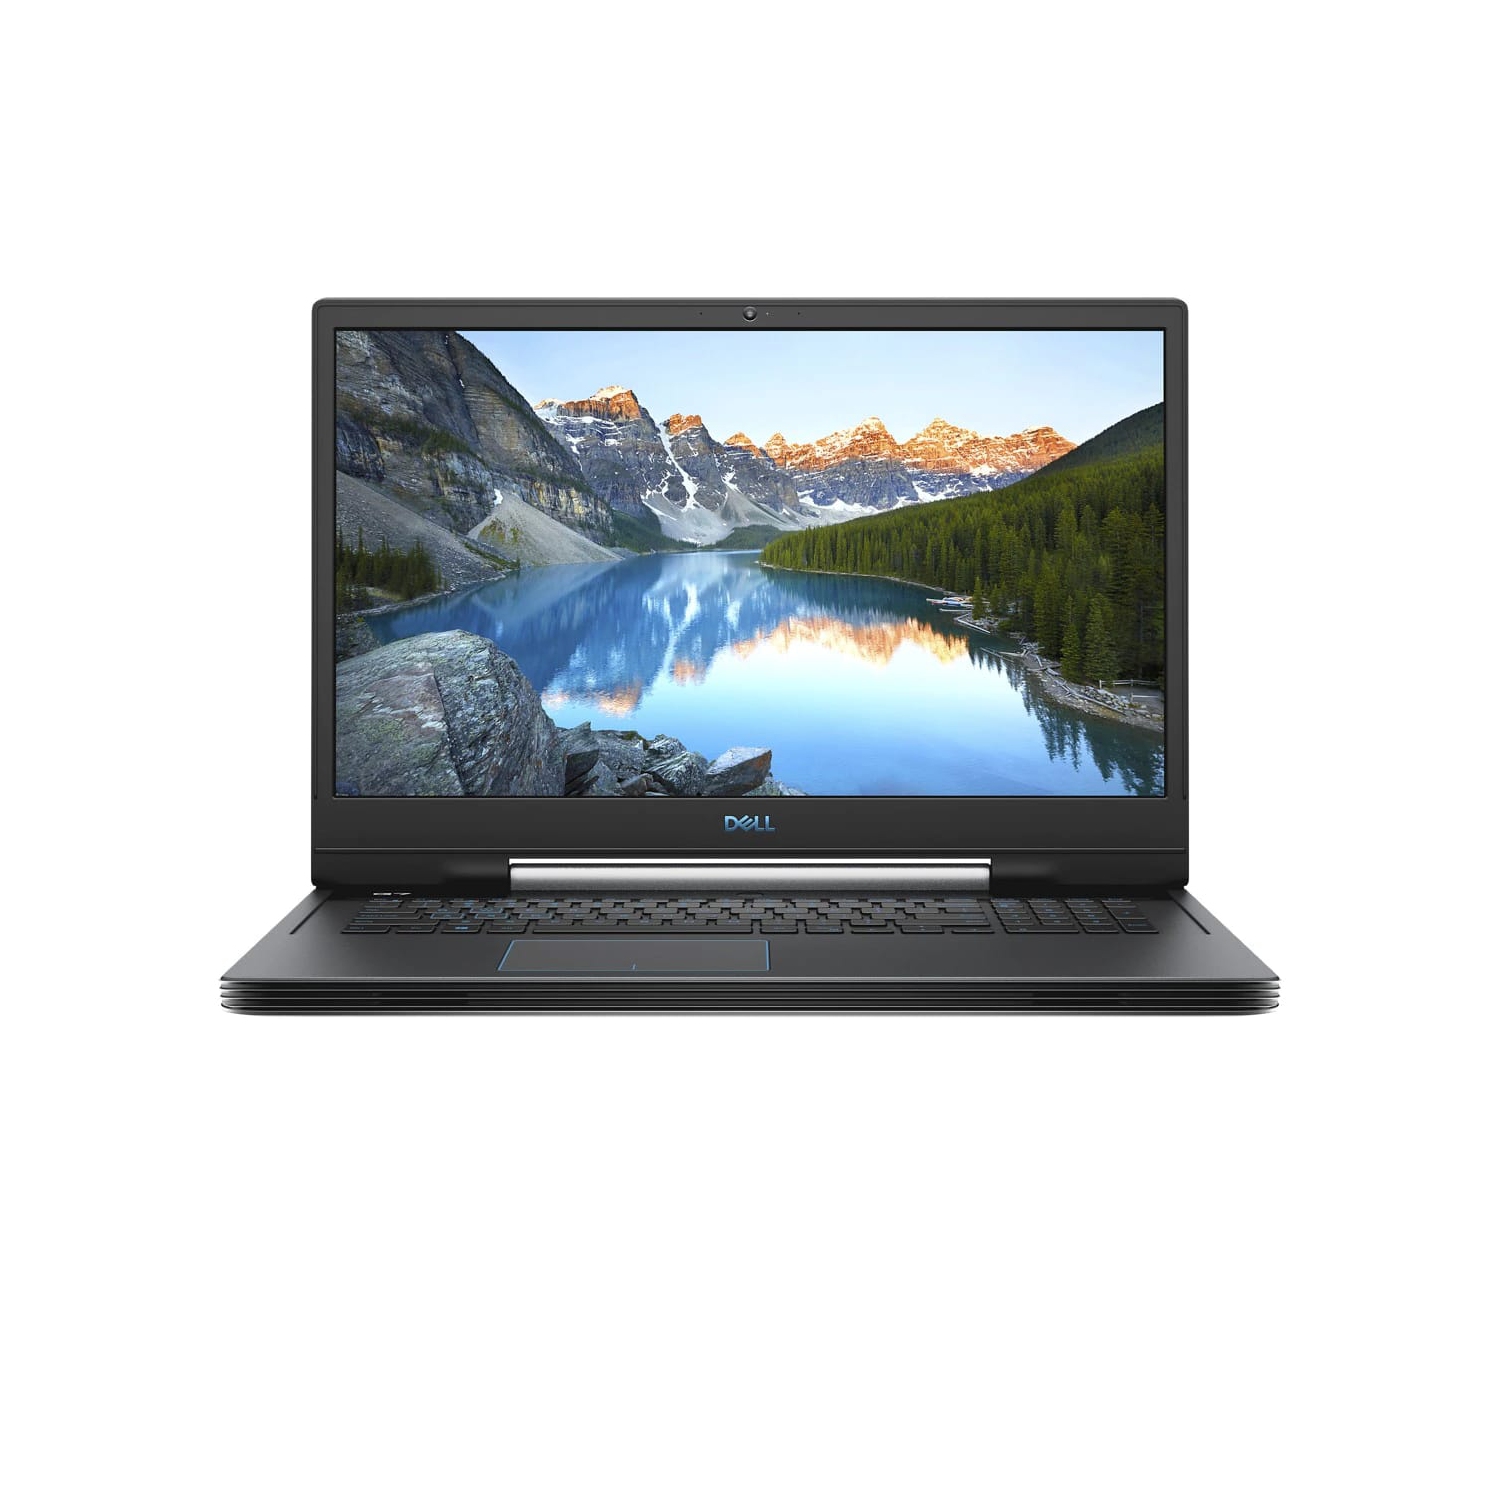 Refurbished (Excellent) – Dell G7 7790 Gaming Laptop (2019) | 17.3" FHD | Core i7 - 256GB SSD - 16GB RAM | 6 Cores @ 4.1 GHz